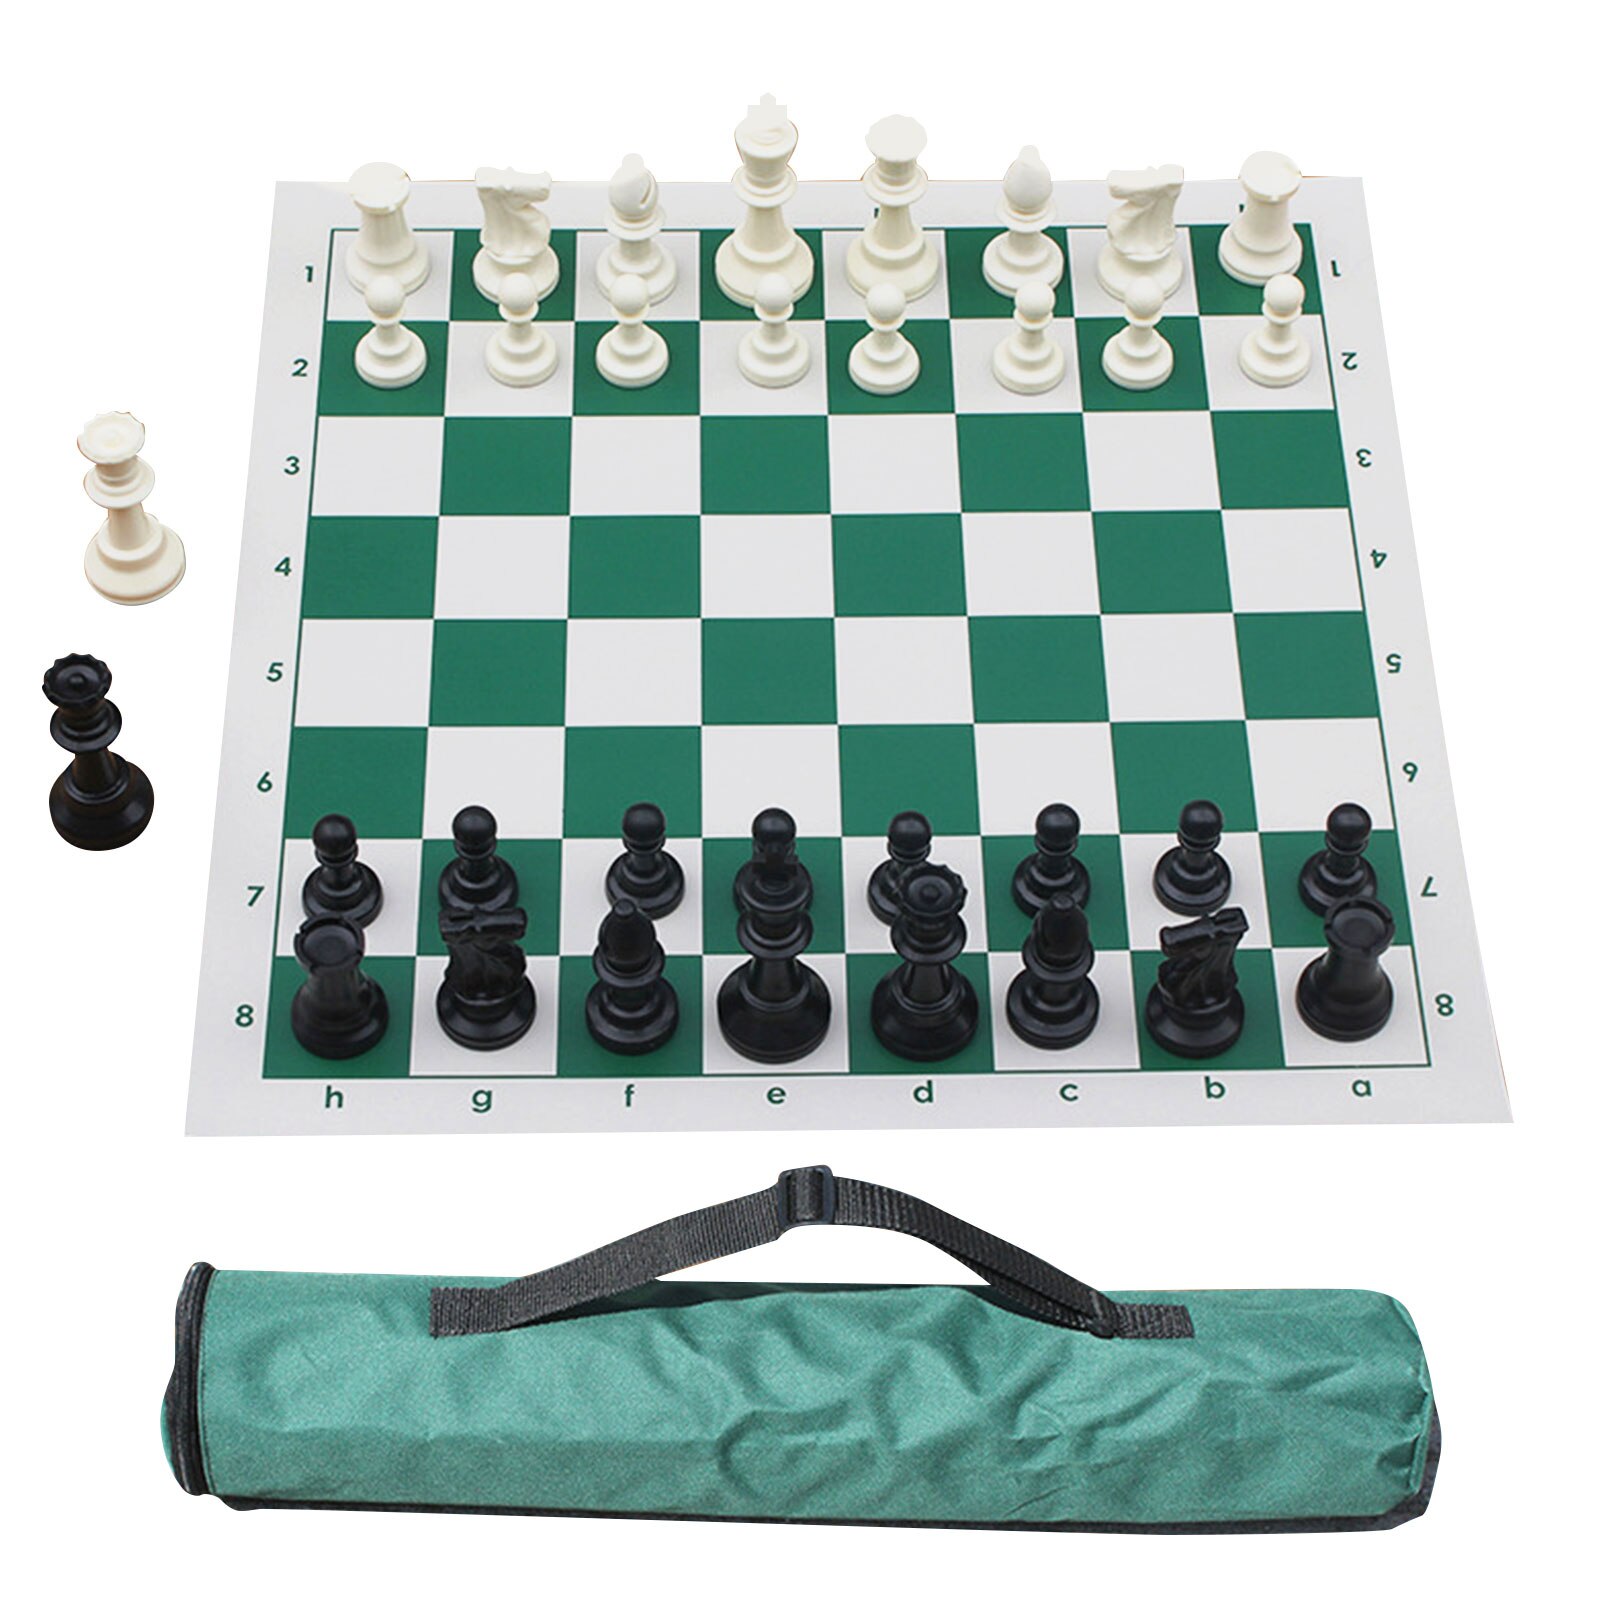 Medieval Wooden Chess Set Tournament Chess With Vinyl Chessboard Board Games Travel Chess Pieces Board Game Kids Toy